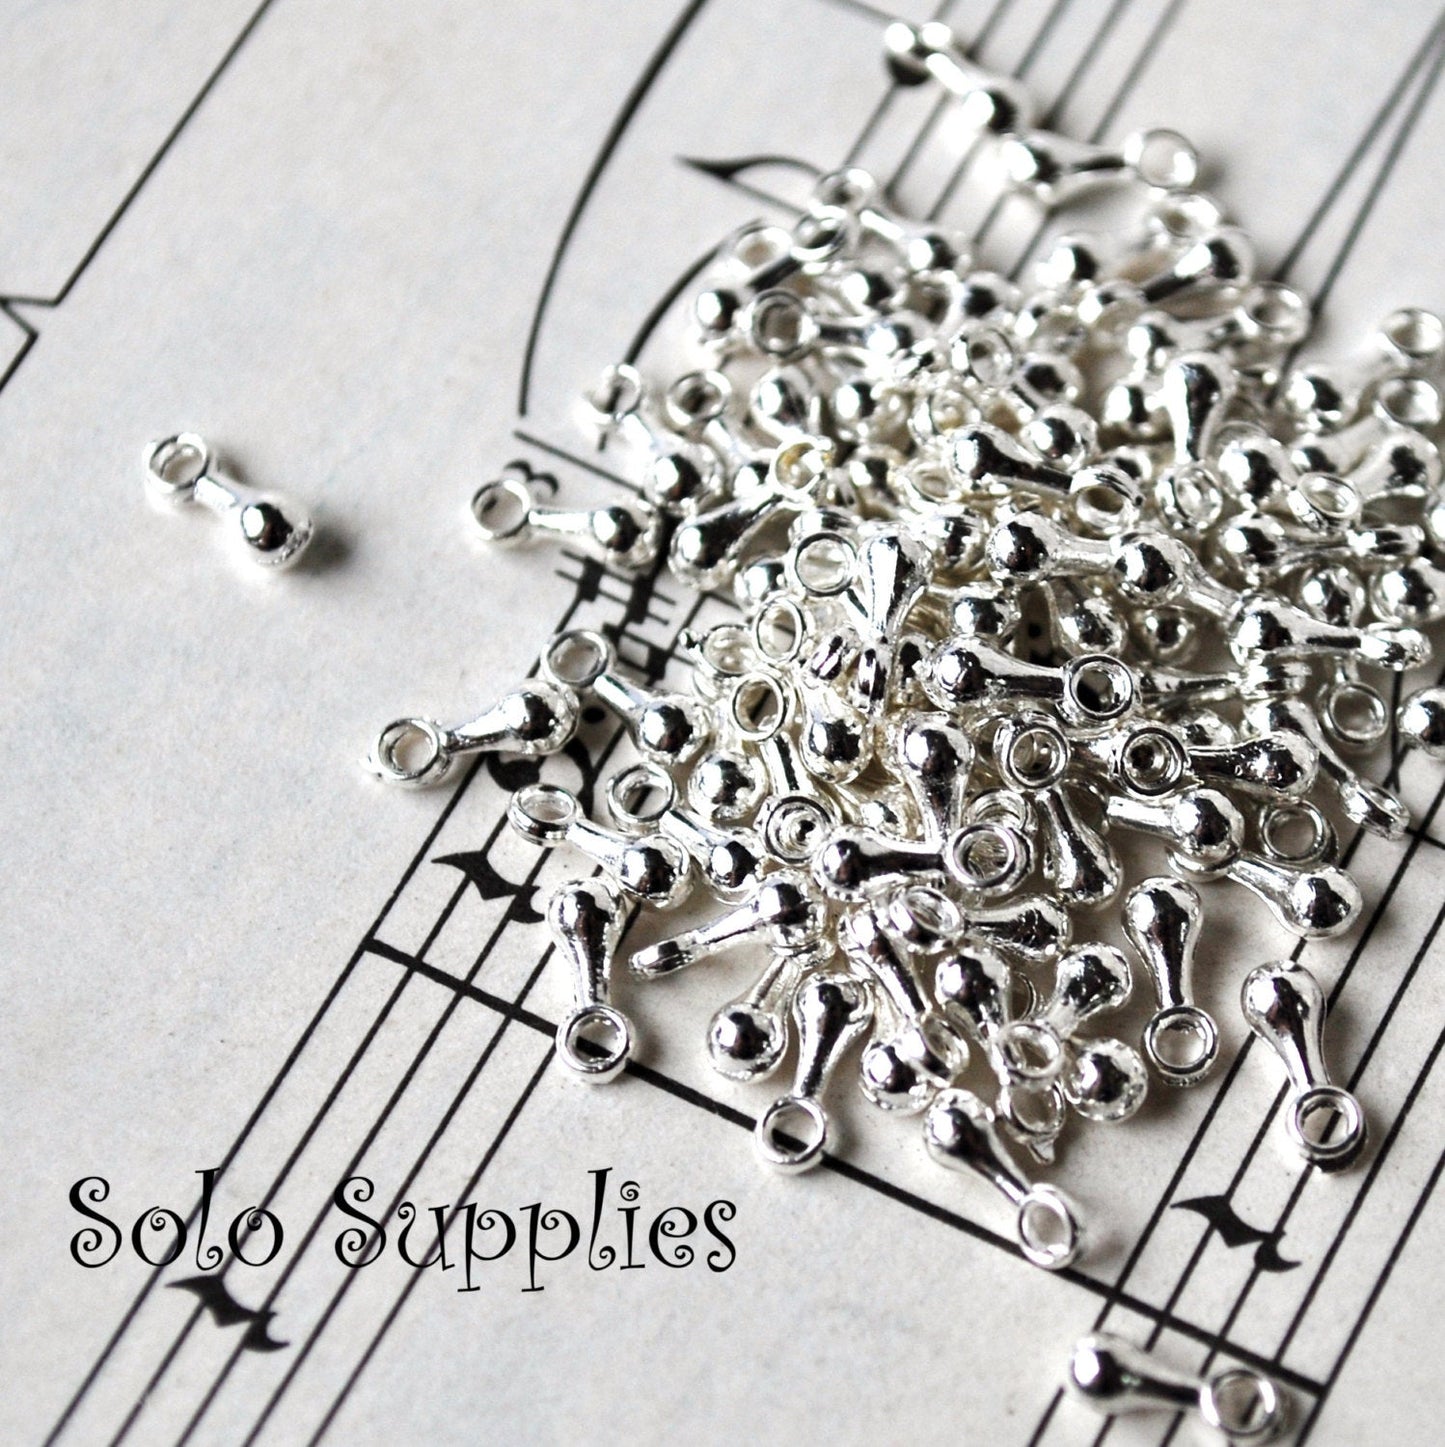 Tiny Weight Charms 6.5mm Long for Dangles or Extender Chains, Fringe Beads, Drops, Etc